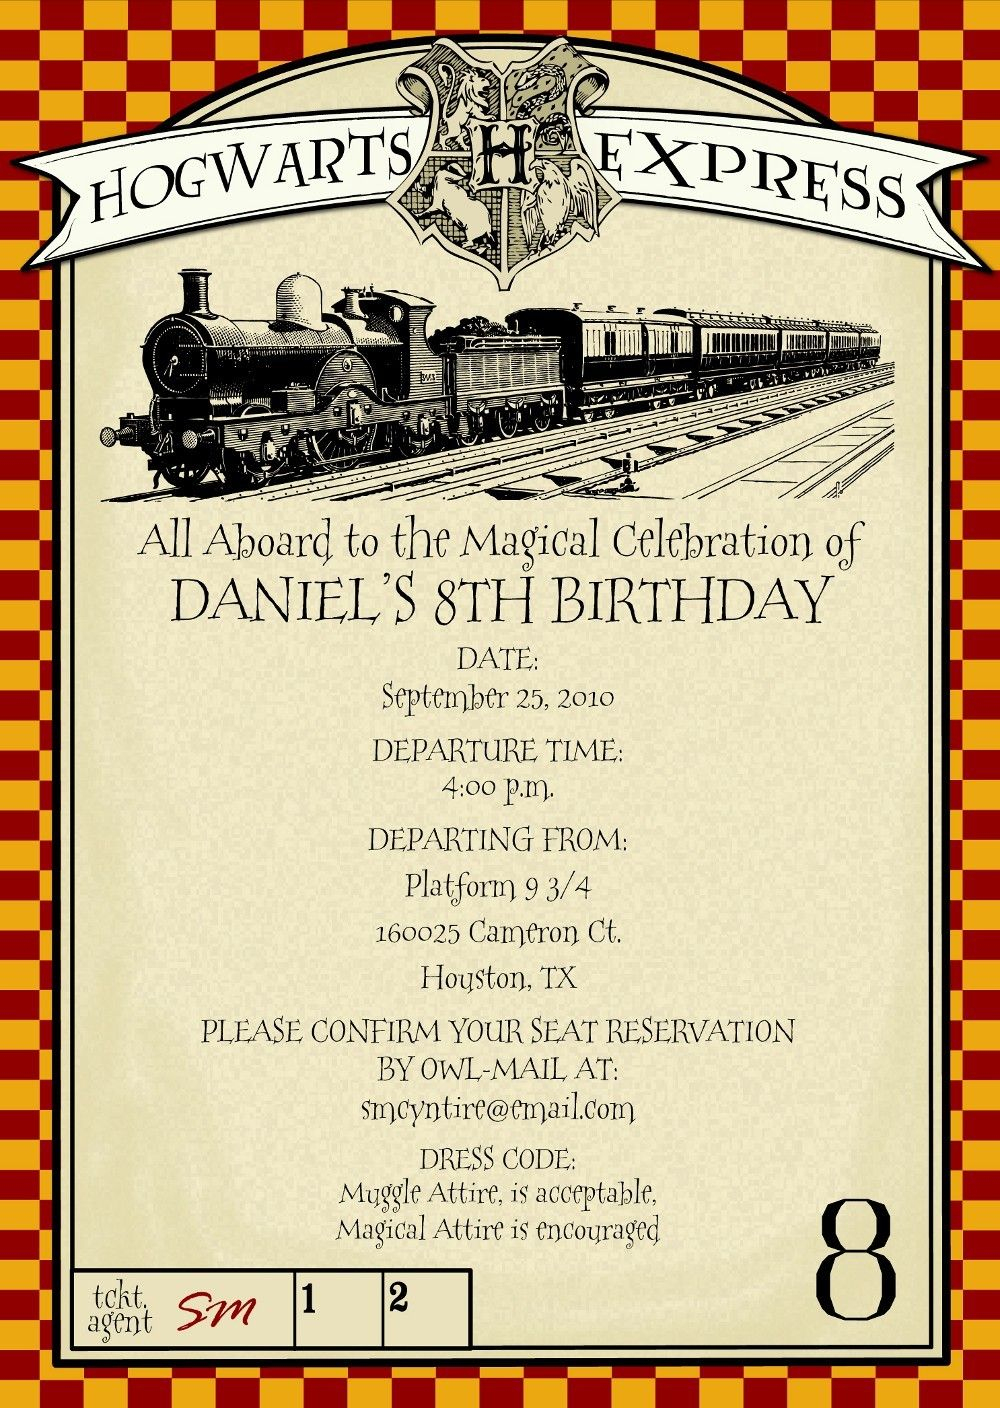 Harry Potter Party Invitations Free Printable | Harry Potter - Harry Potter Birthday Invitations Free Printable